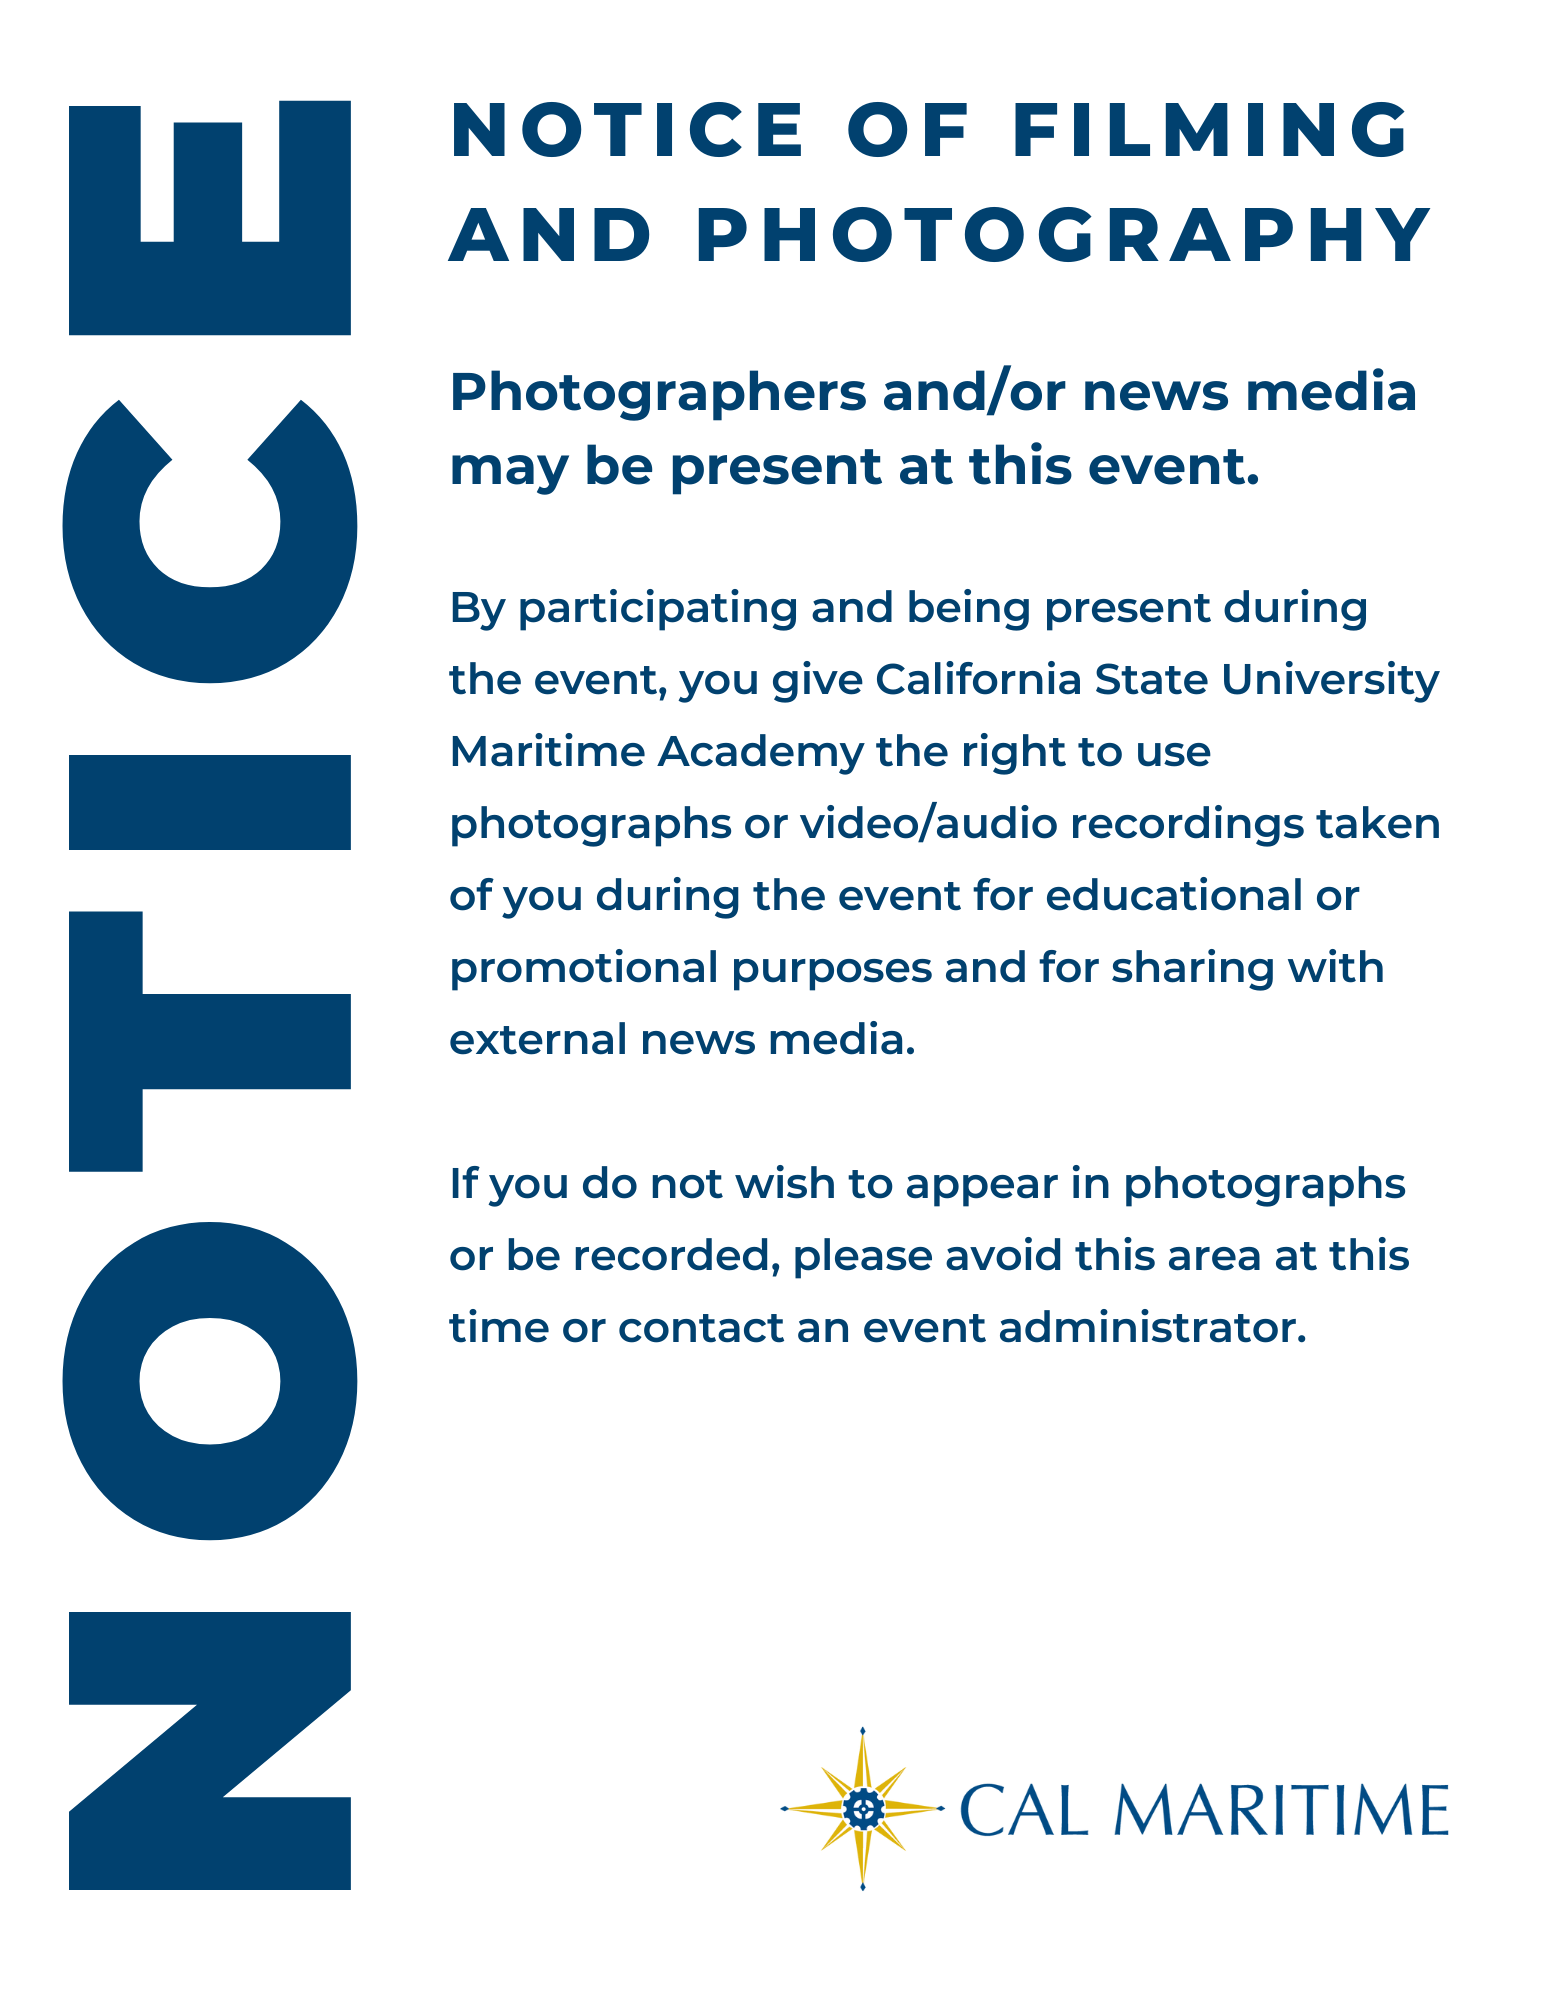 NOTICE OF FILMING AND PHOTOGRAPHY - LETTER BLUE